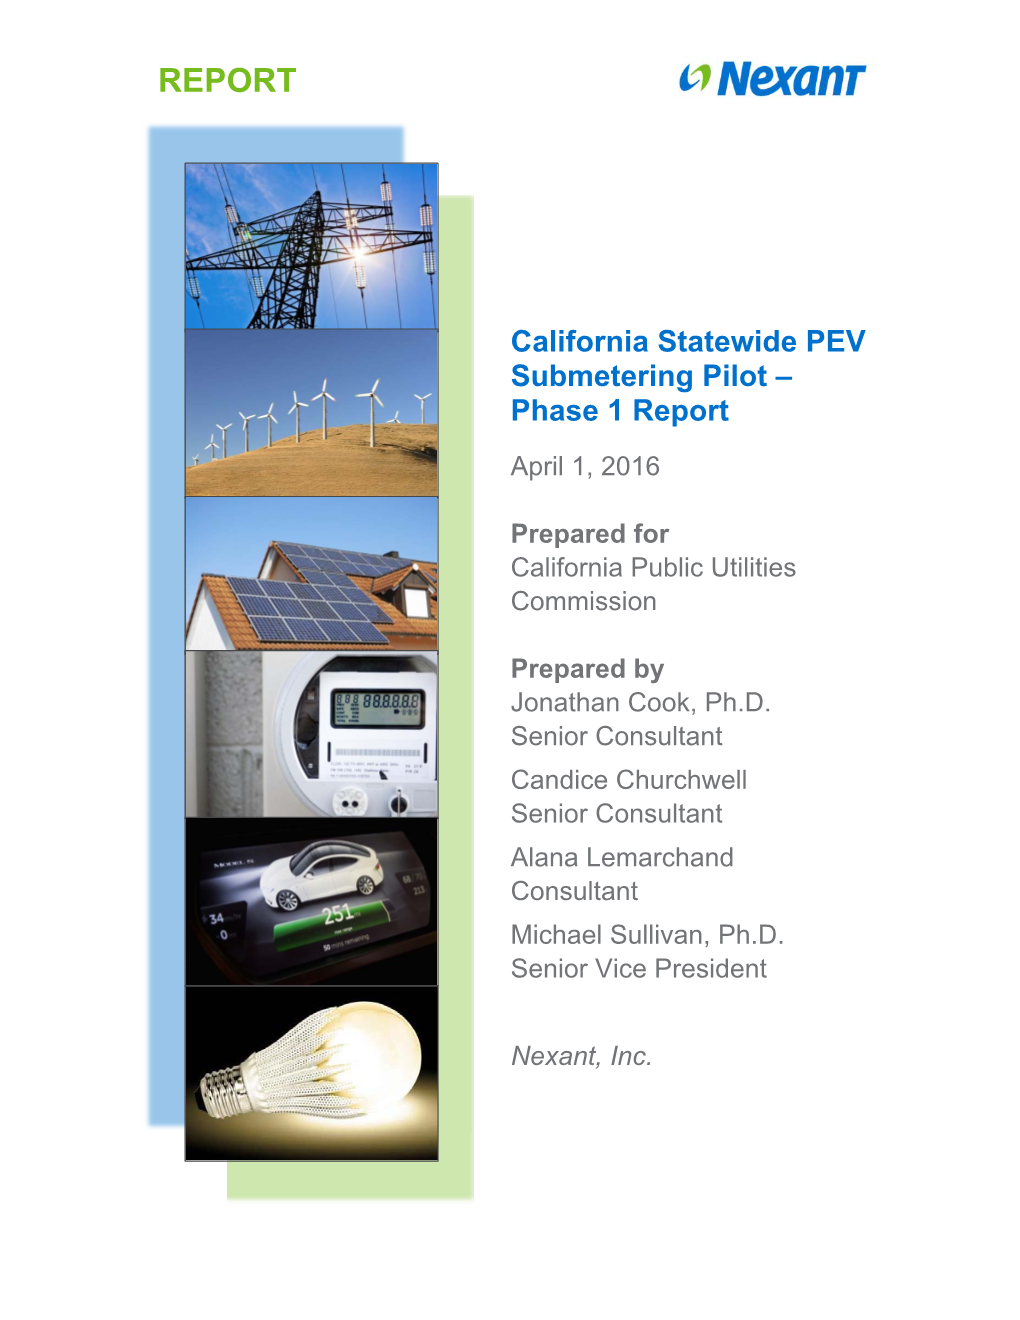 California Statewide PEV Submetering Pilot – Phase 1 Report